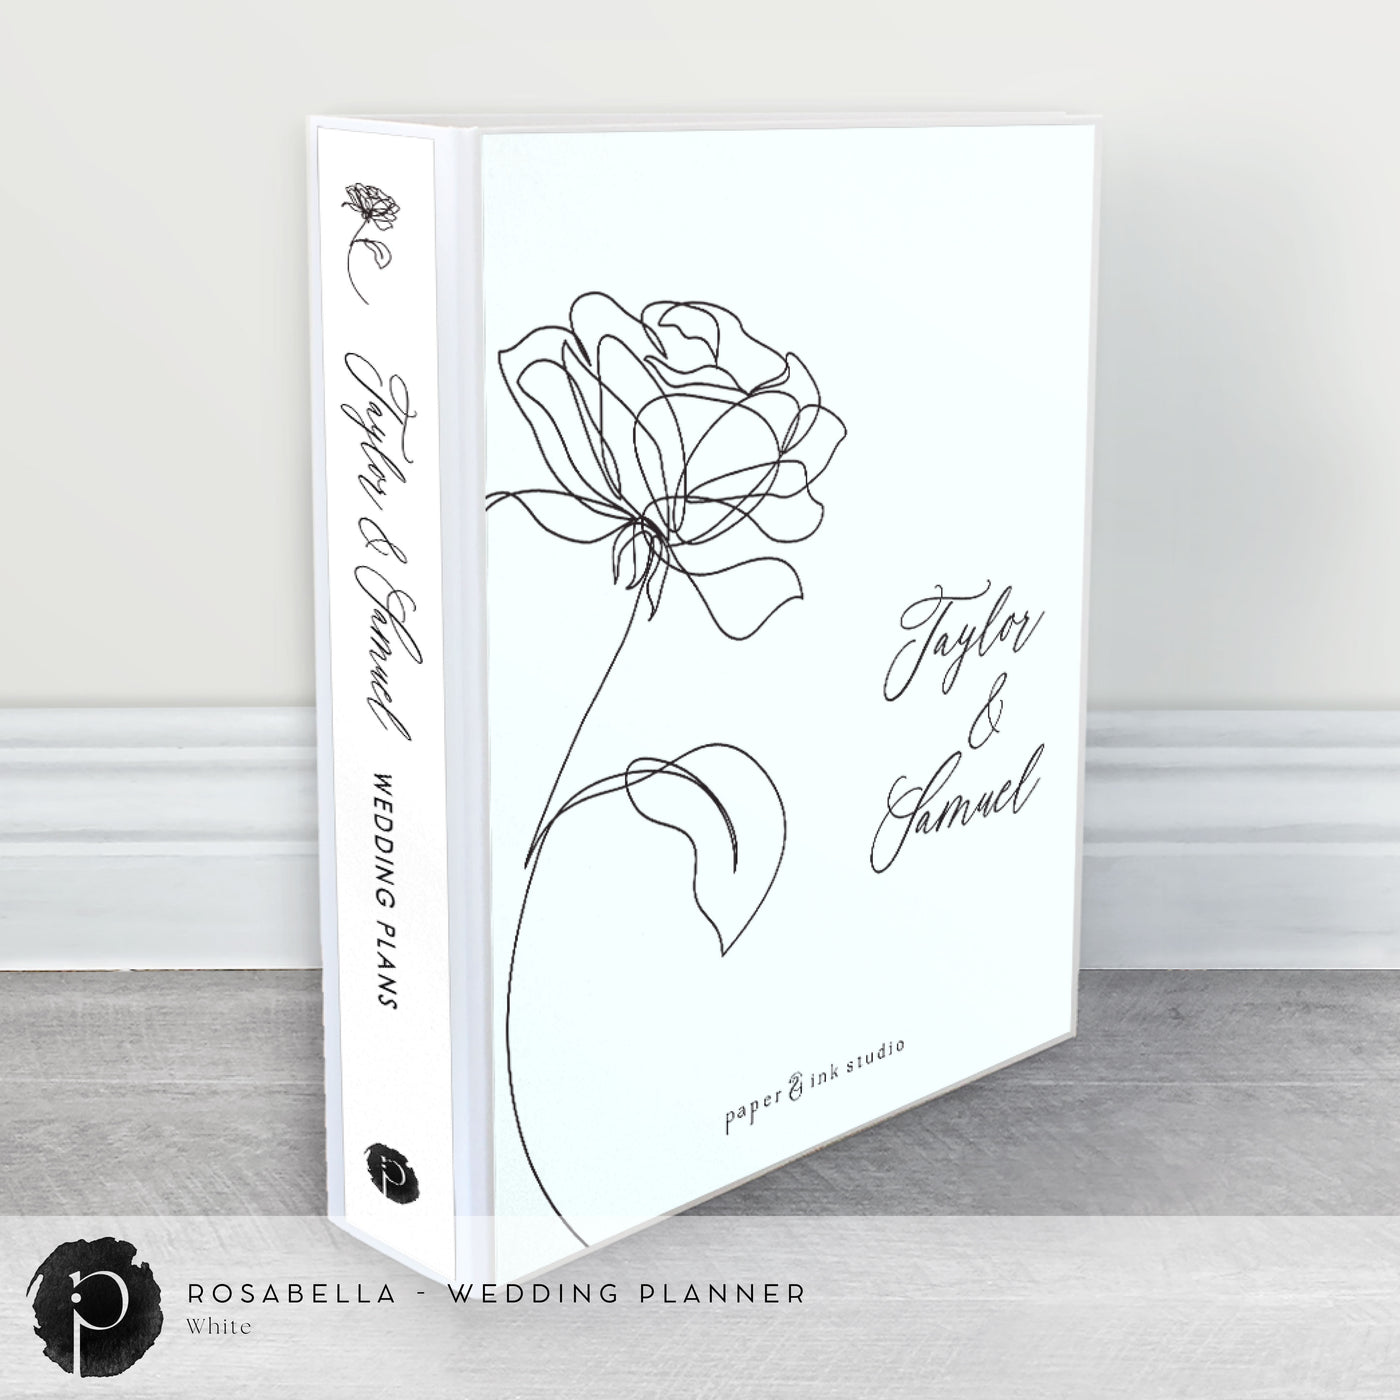 Personalised Wedding Planner & Organiser - Ultimate Guide w Checklists - Rosabella